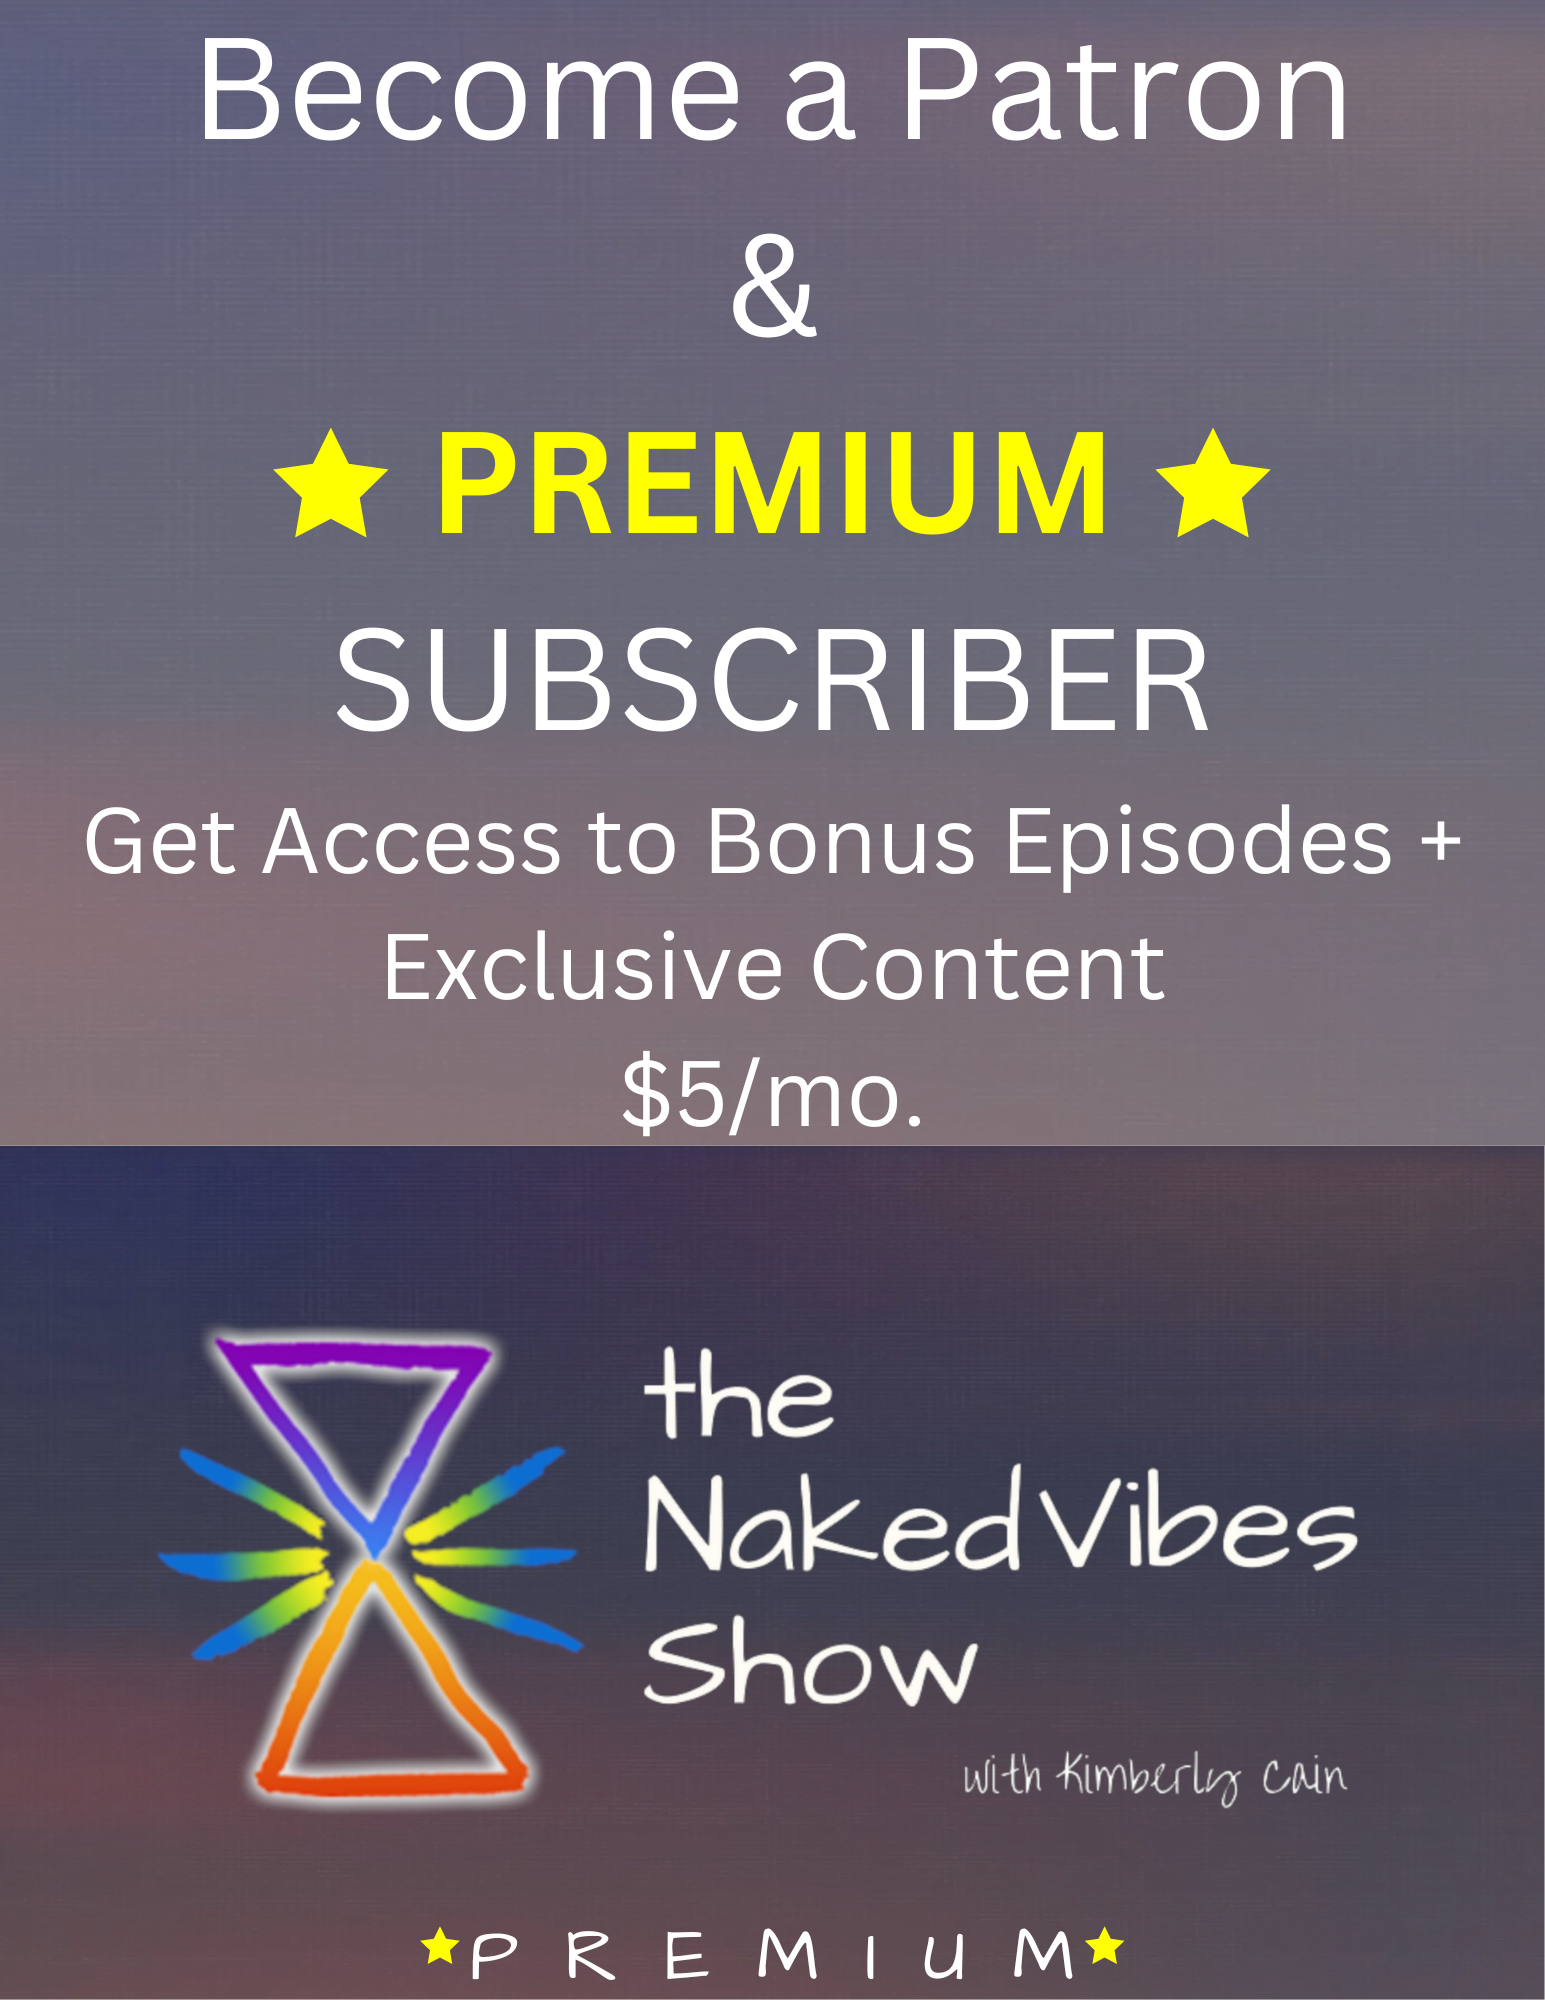 Become a Patron - Subscribe to the Naked Vibes Show and get a monthly bonus episode